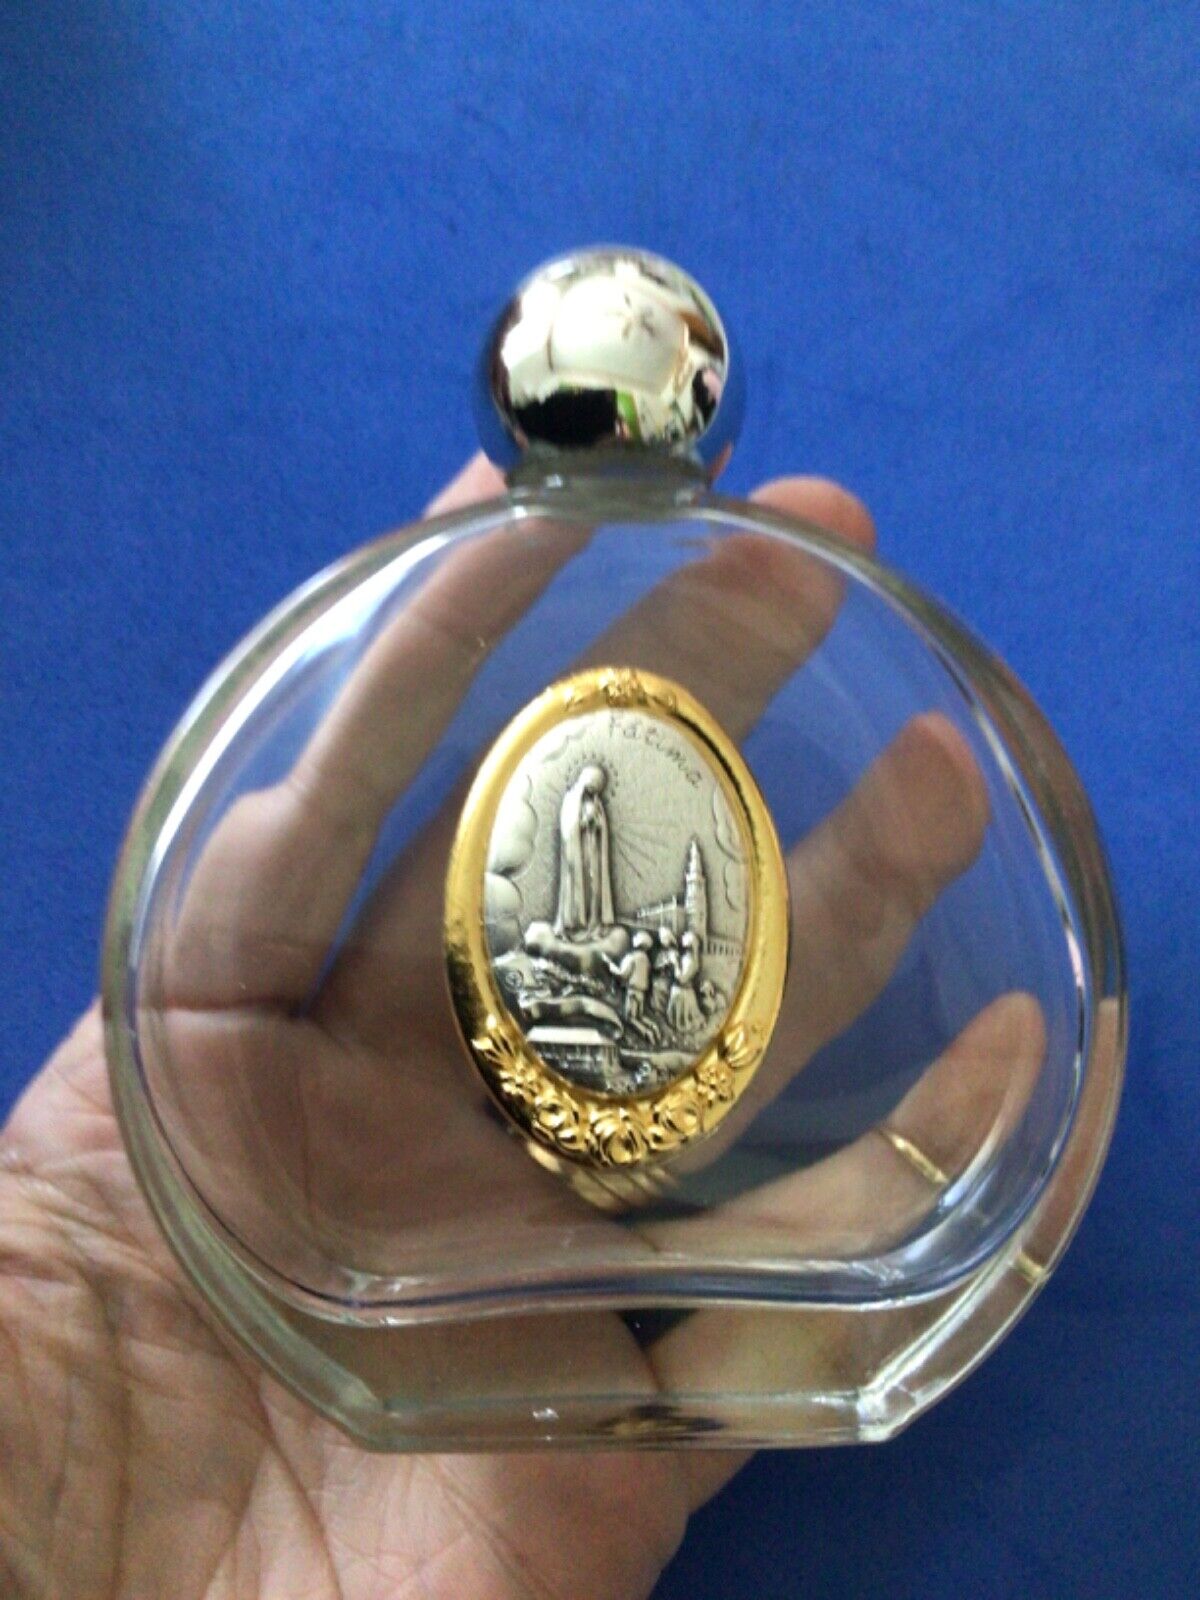 LG HOLY WATER Glass Bottle Our Lady of FATMIA Protection Saint Medal 4oz Empty